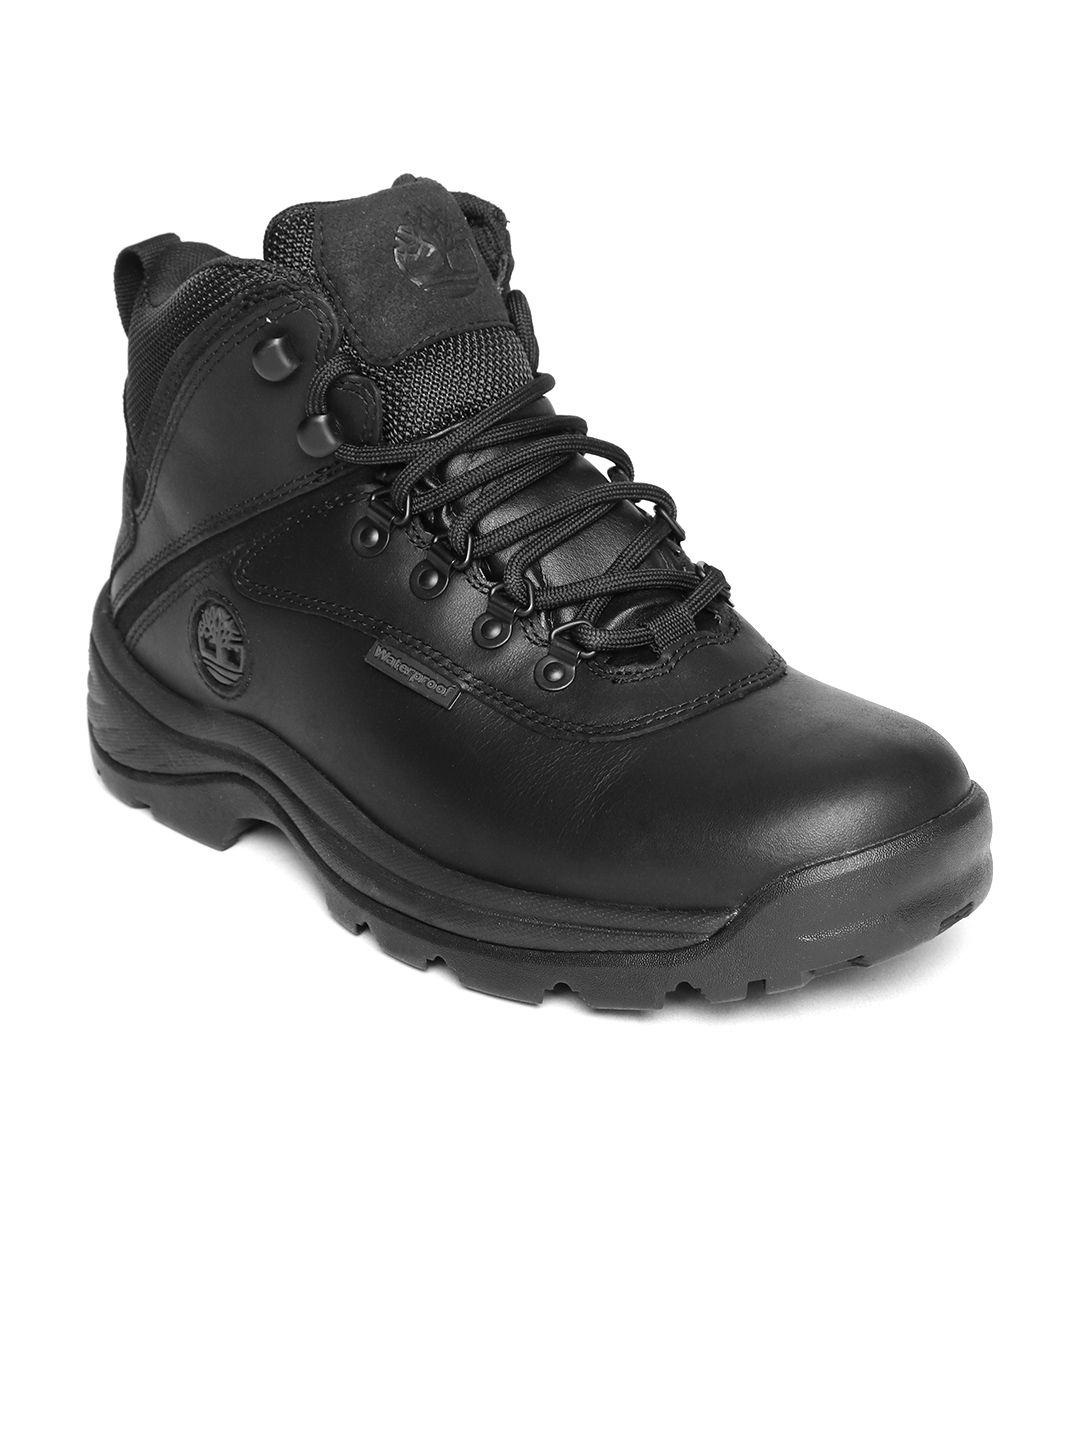 timberland-men-black-white-ledge-mid-waterproof-leather-hiking-boots